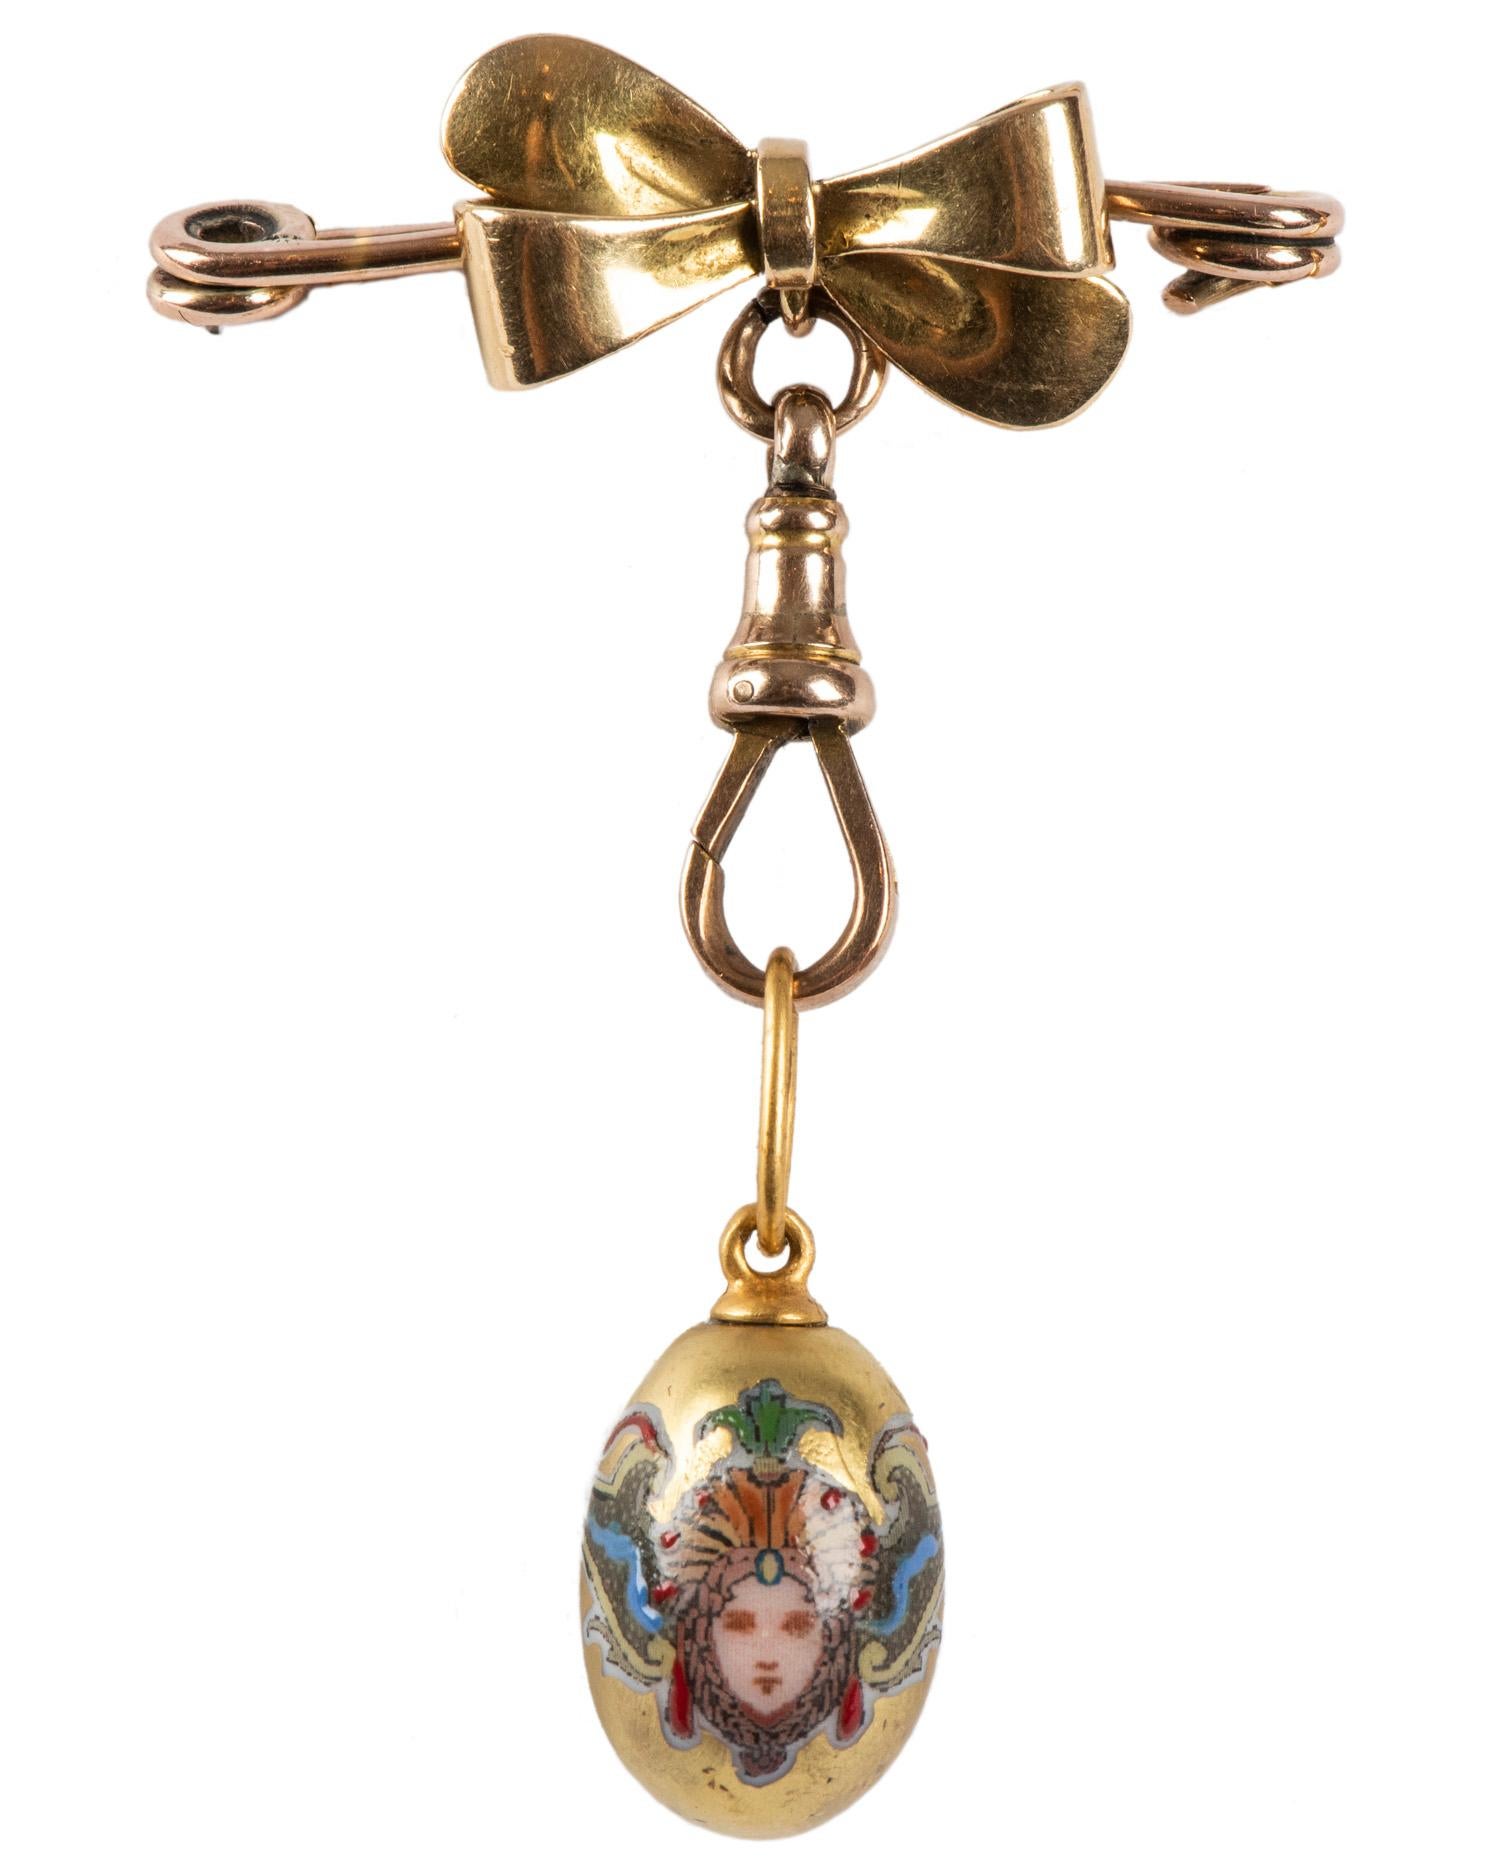 A Victorian pin designed as an 18k yellow gold bow on a 14k rose gold pin, suspending a Russian hand-painted porcelain gilded egg pendant, inscribed XB for Xristos Voskrese, a Russian Easter proclamation on pink ground..  

The pin circa 1890, the